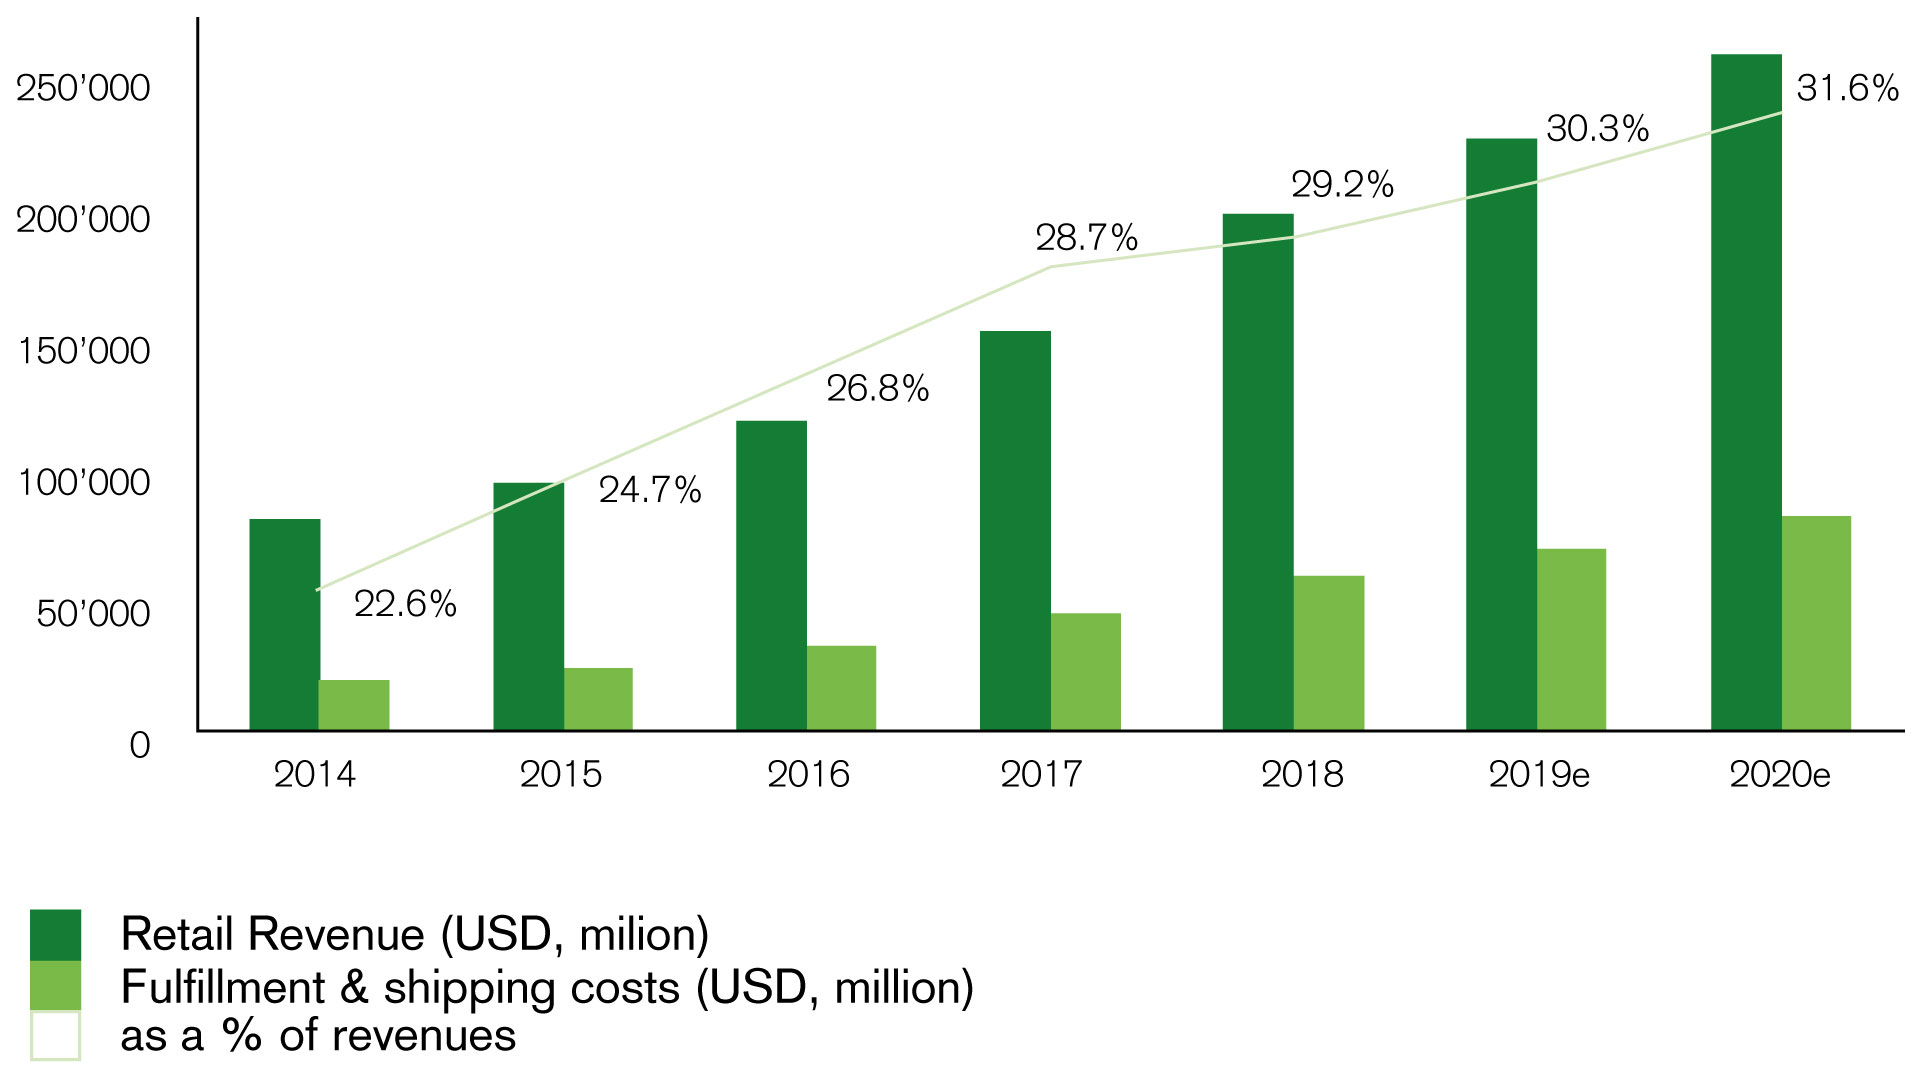 Chart 1b. Rising trend of distribution costs at Amazon